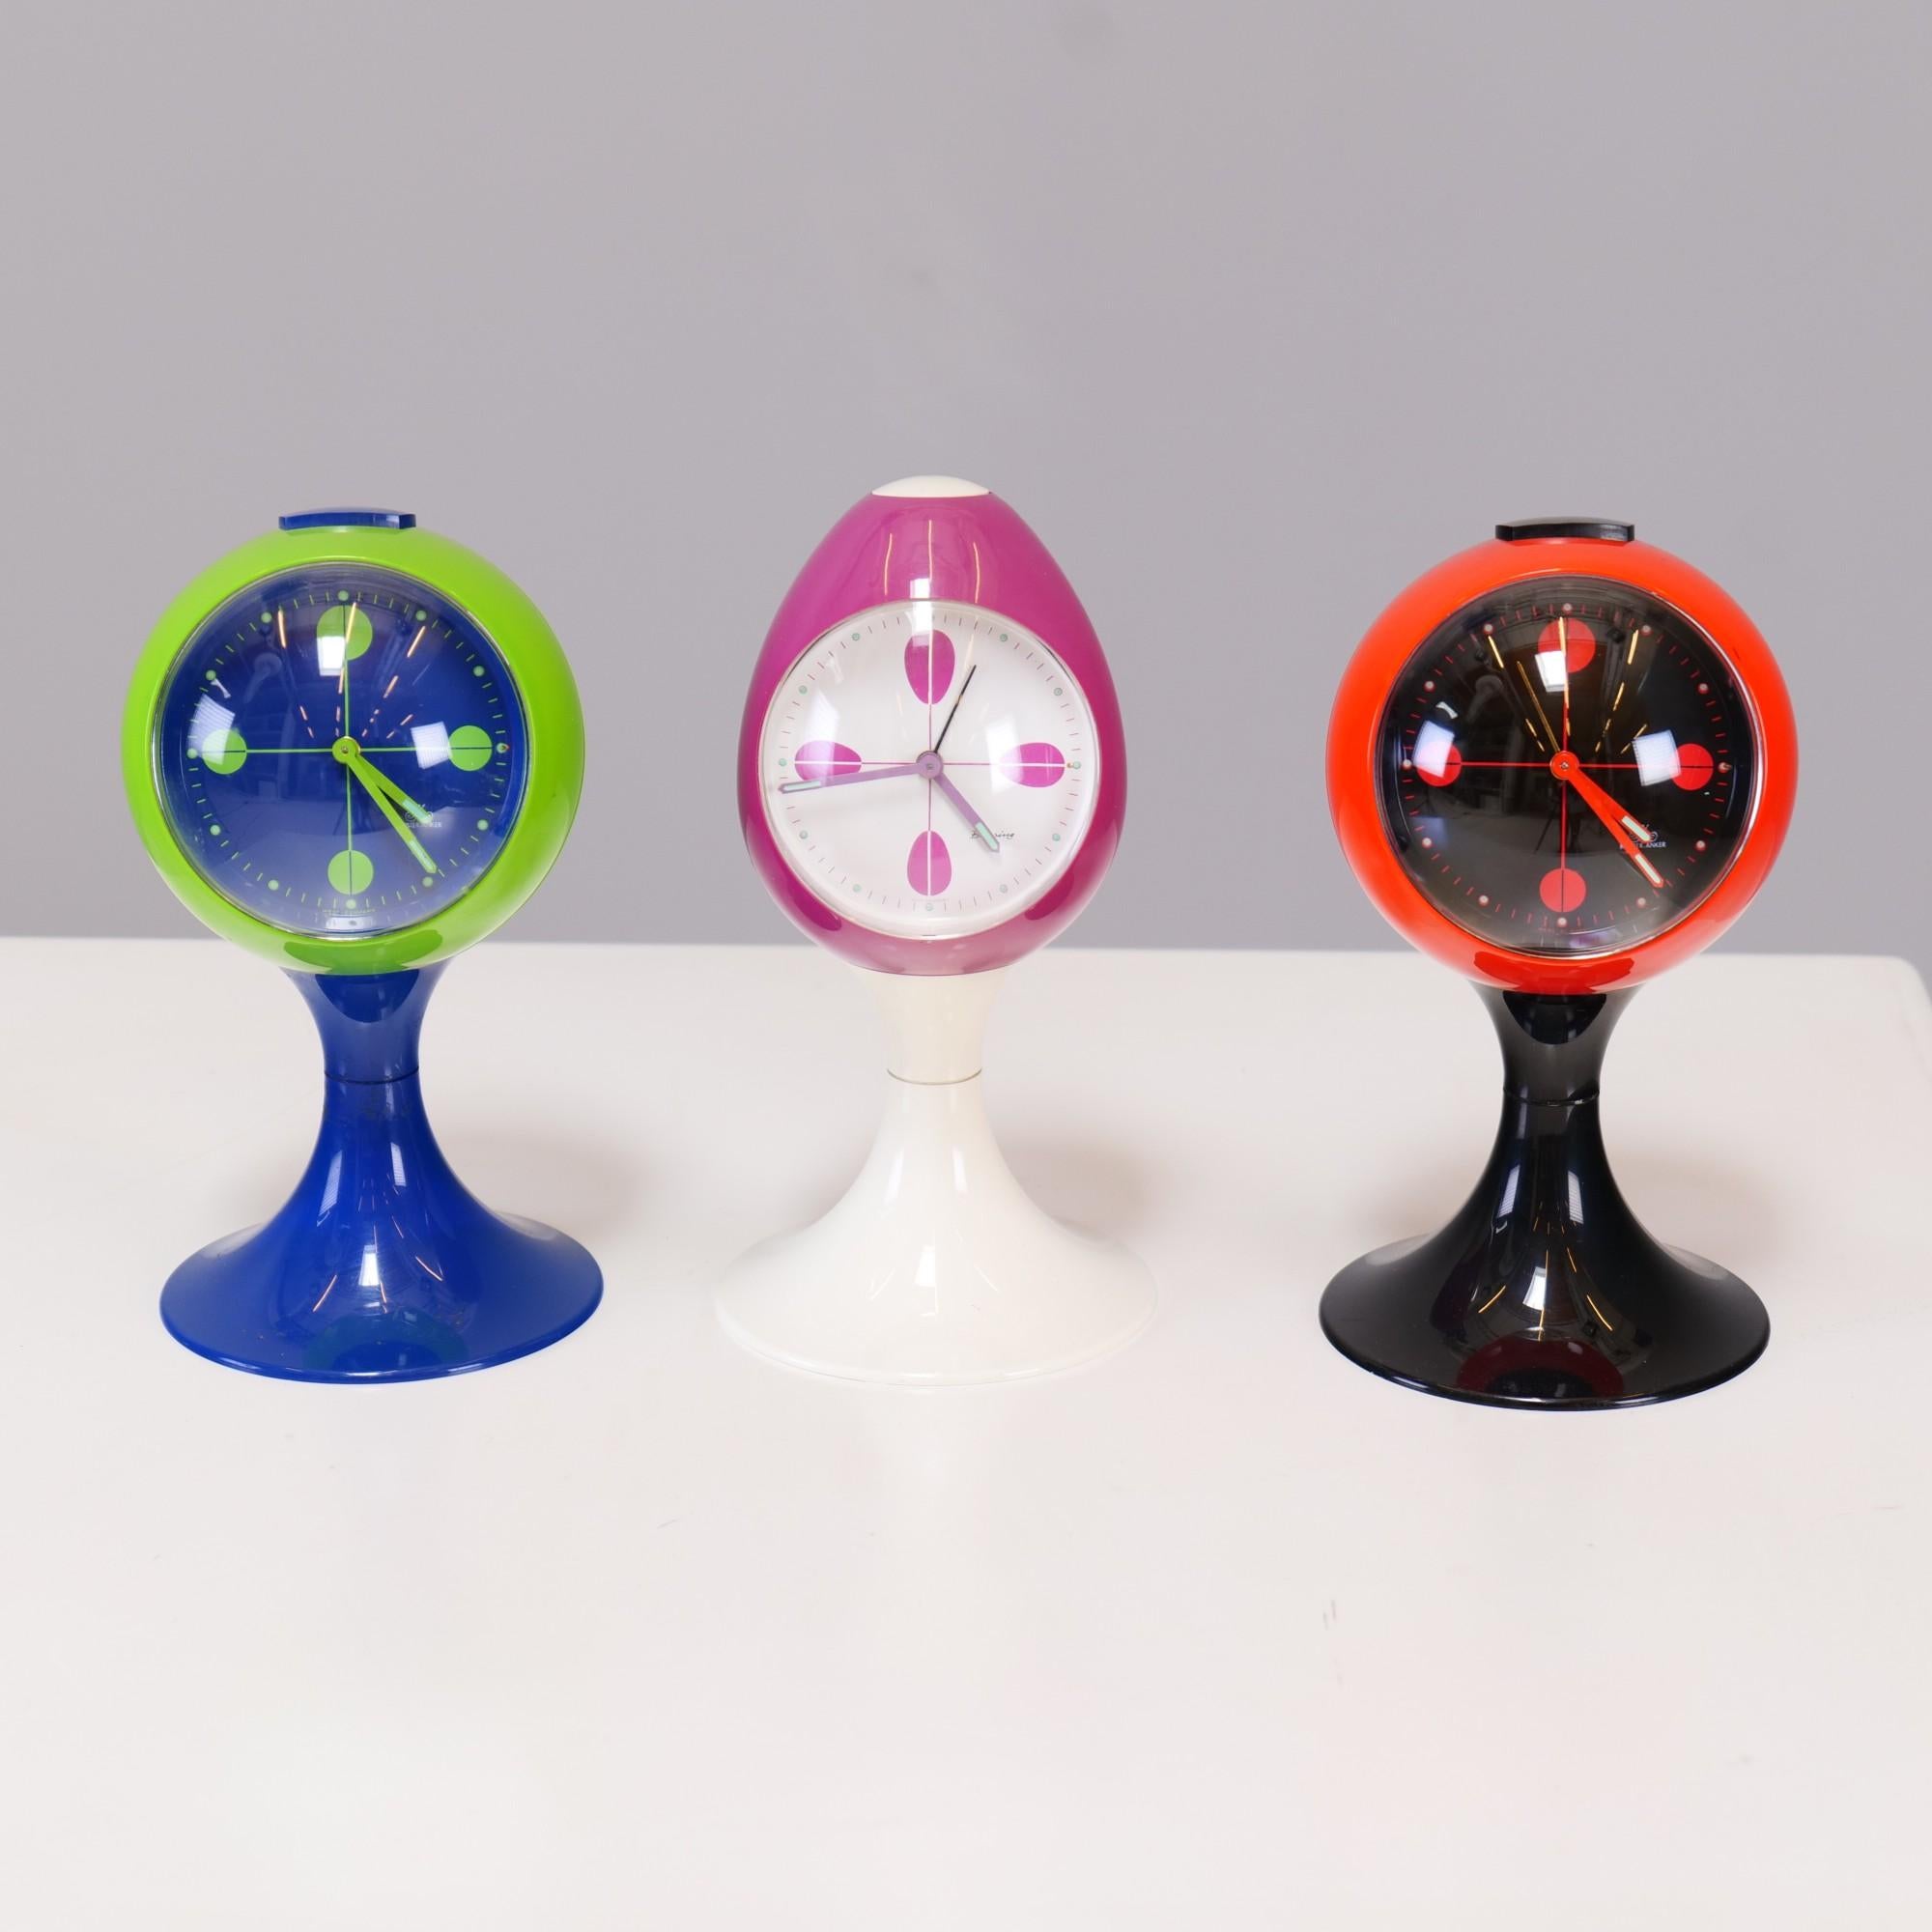 Very rare space age tulip design table alarm clocks.
Great collectible set for space age & vintage design experts.